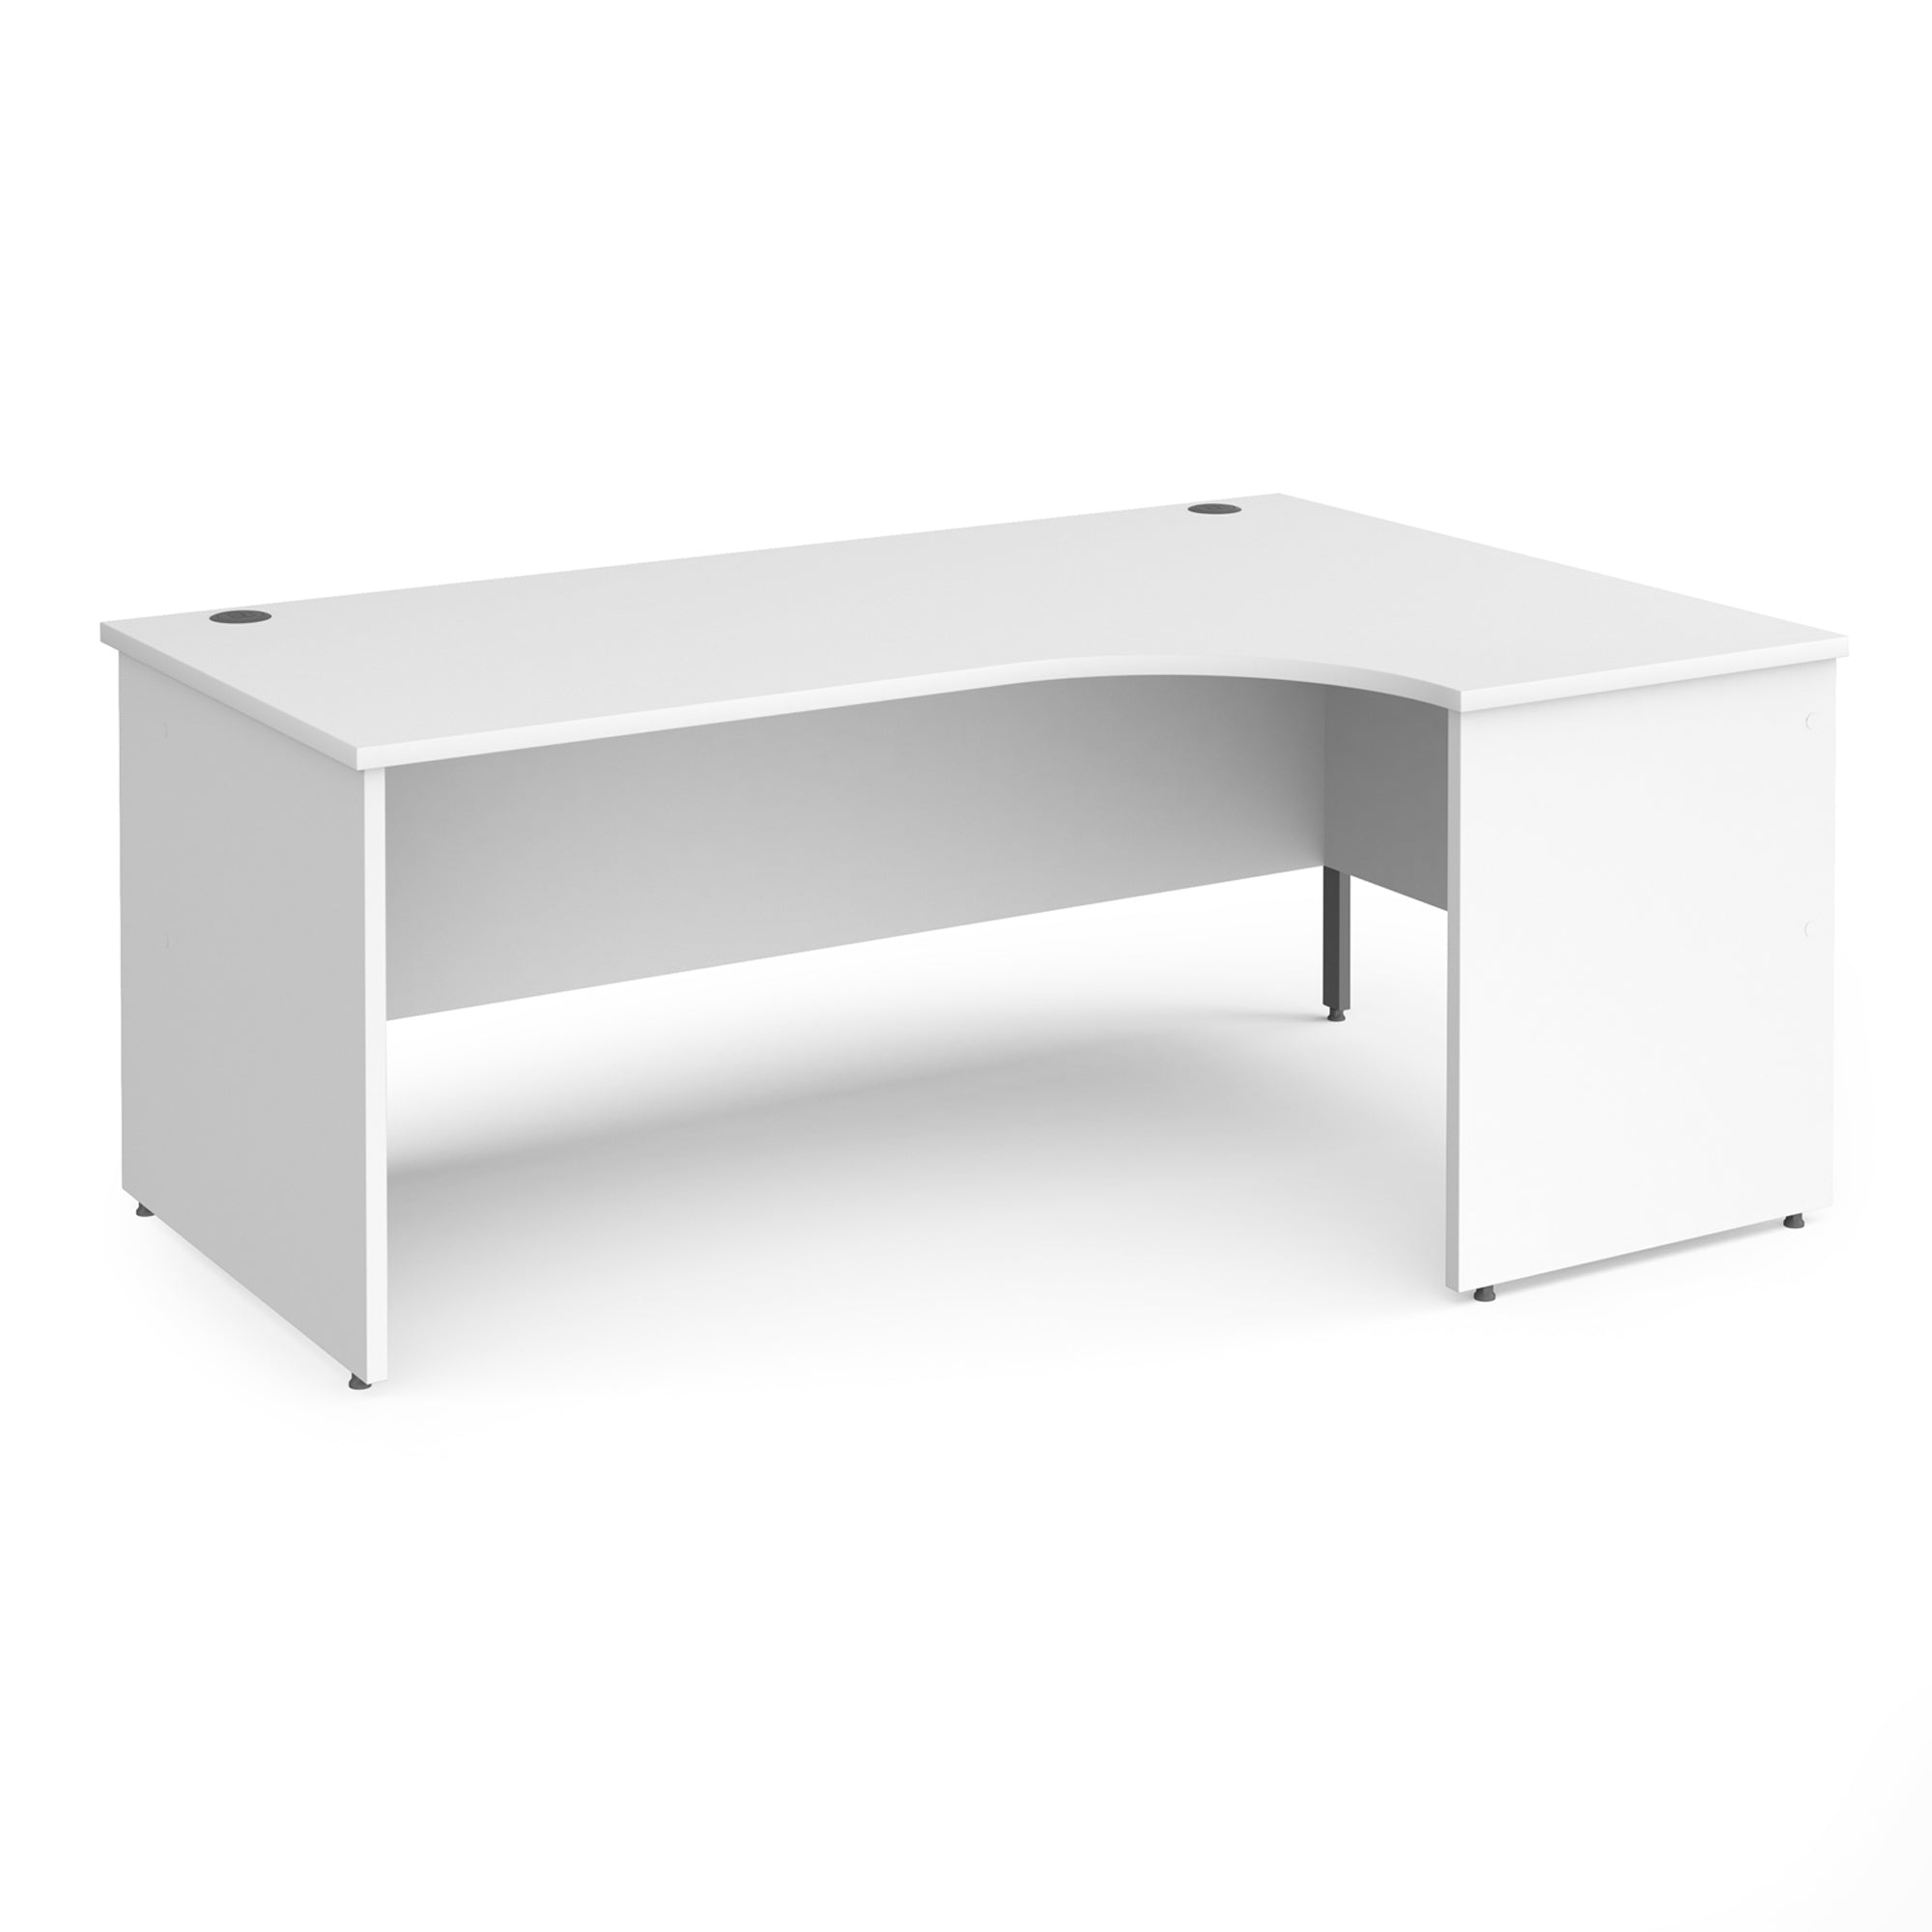 Contract 25 right hand ergonomic desk with panel ends and corner leg - Office Products Online